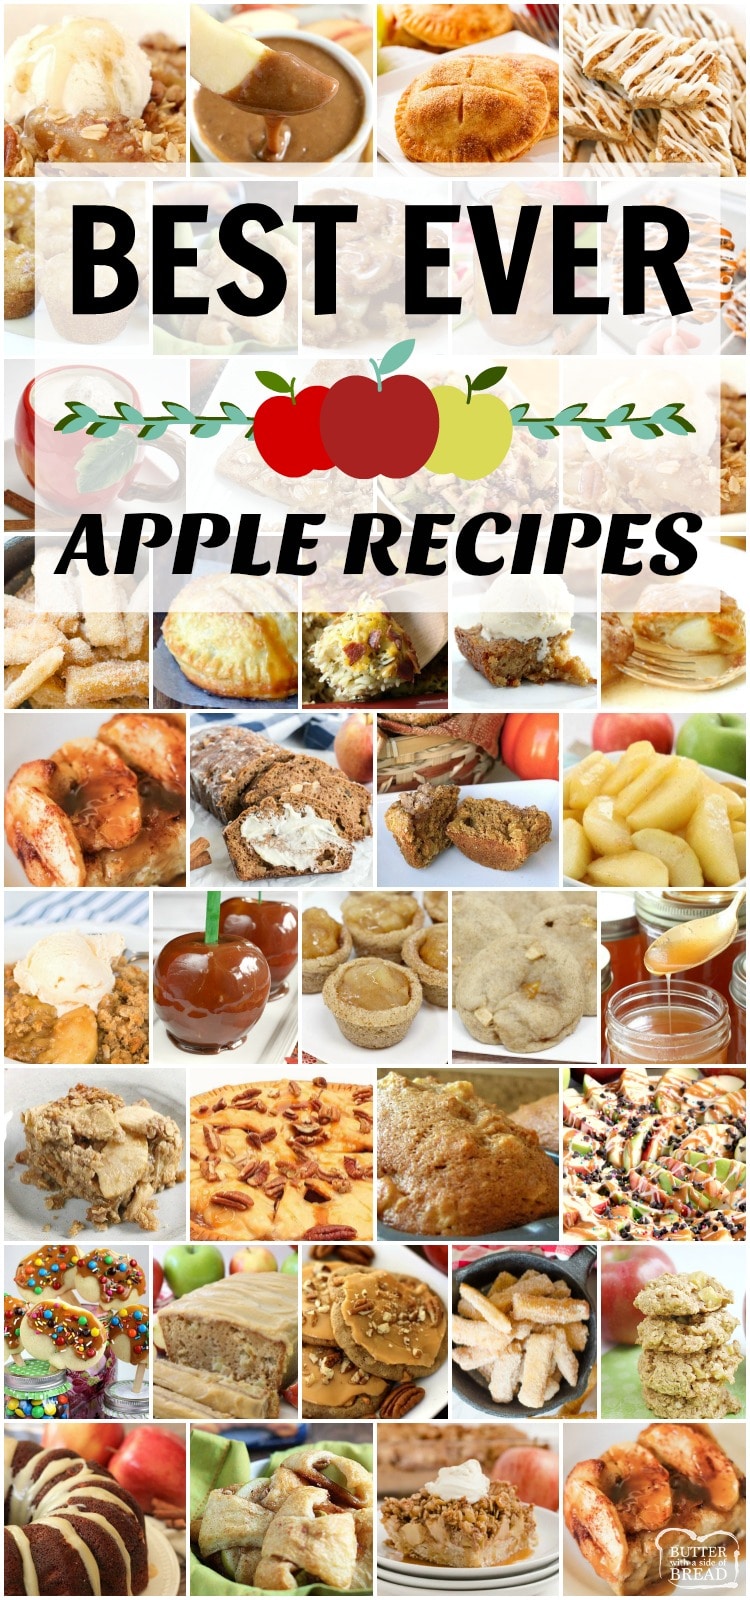 Tried & true incredible Apple Recipes that everyone enjoys! Featuring apple desserts, apple snacks, cookies, breads and more. Easy apple recipe for fall baking or any time of the year. #apples #recipe #applerecipes #baking #Fall #dessert #food #recipes from BUTTER WITH A SIDE OF BREAD